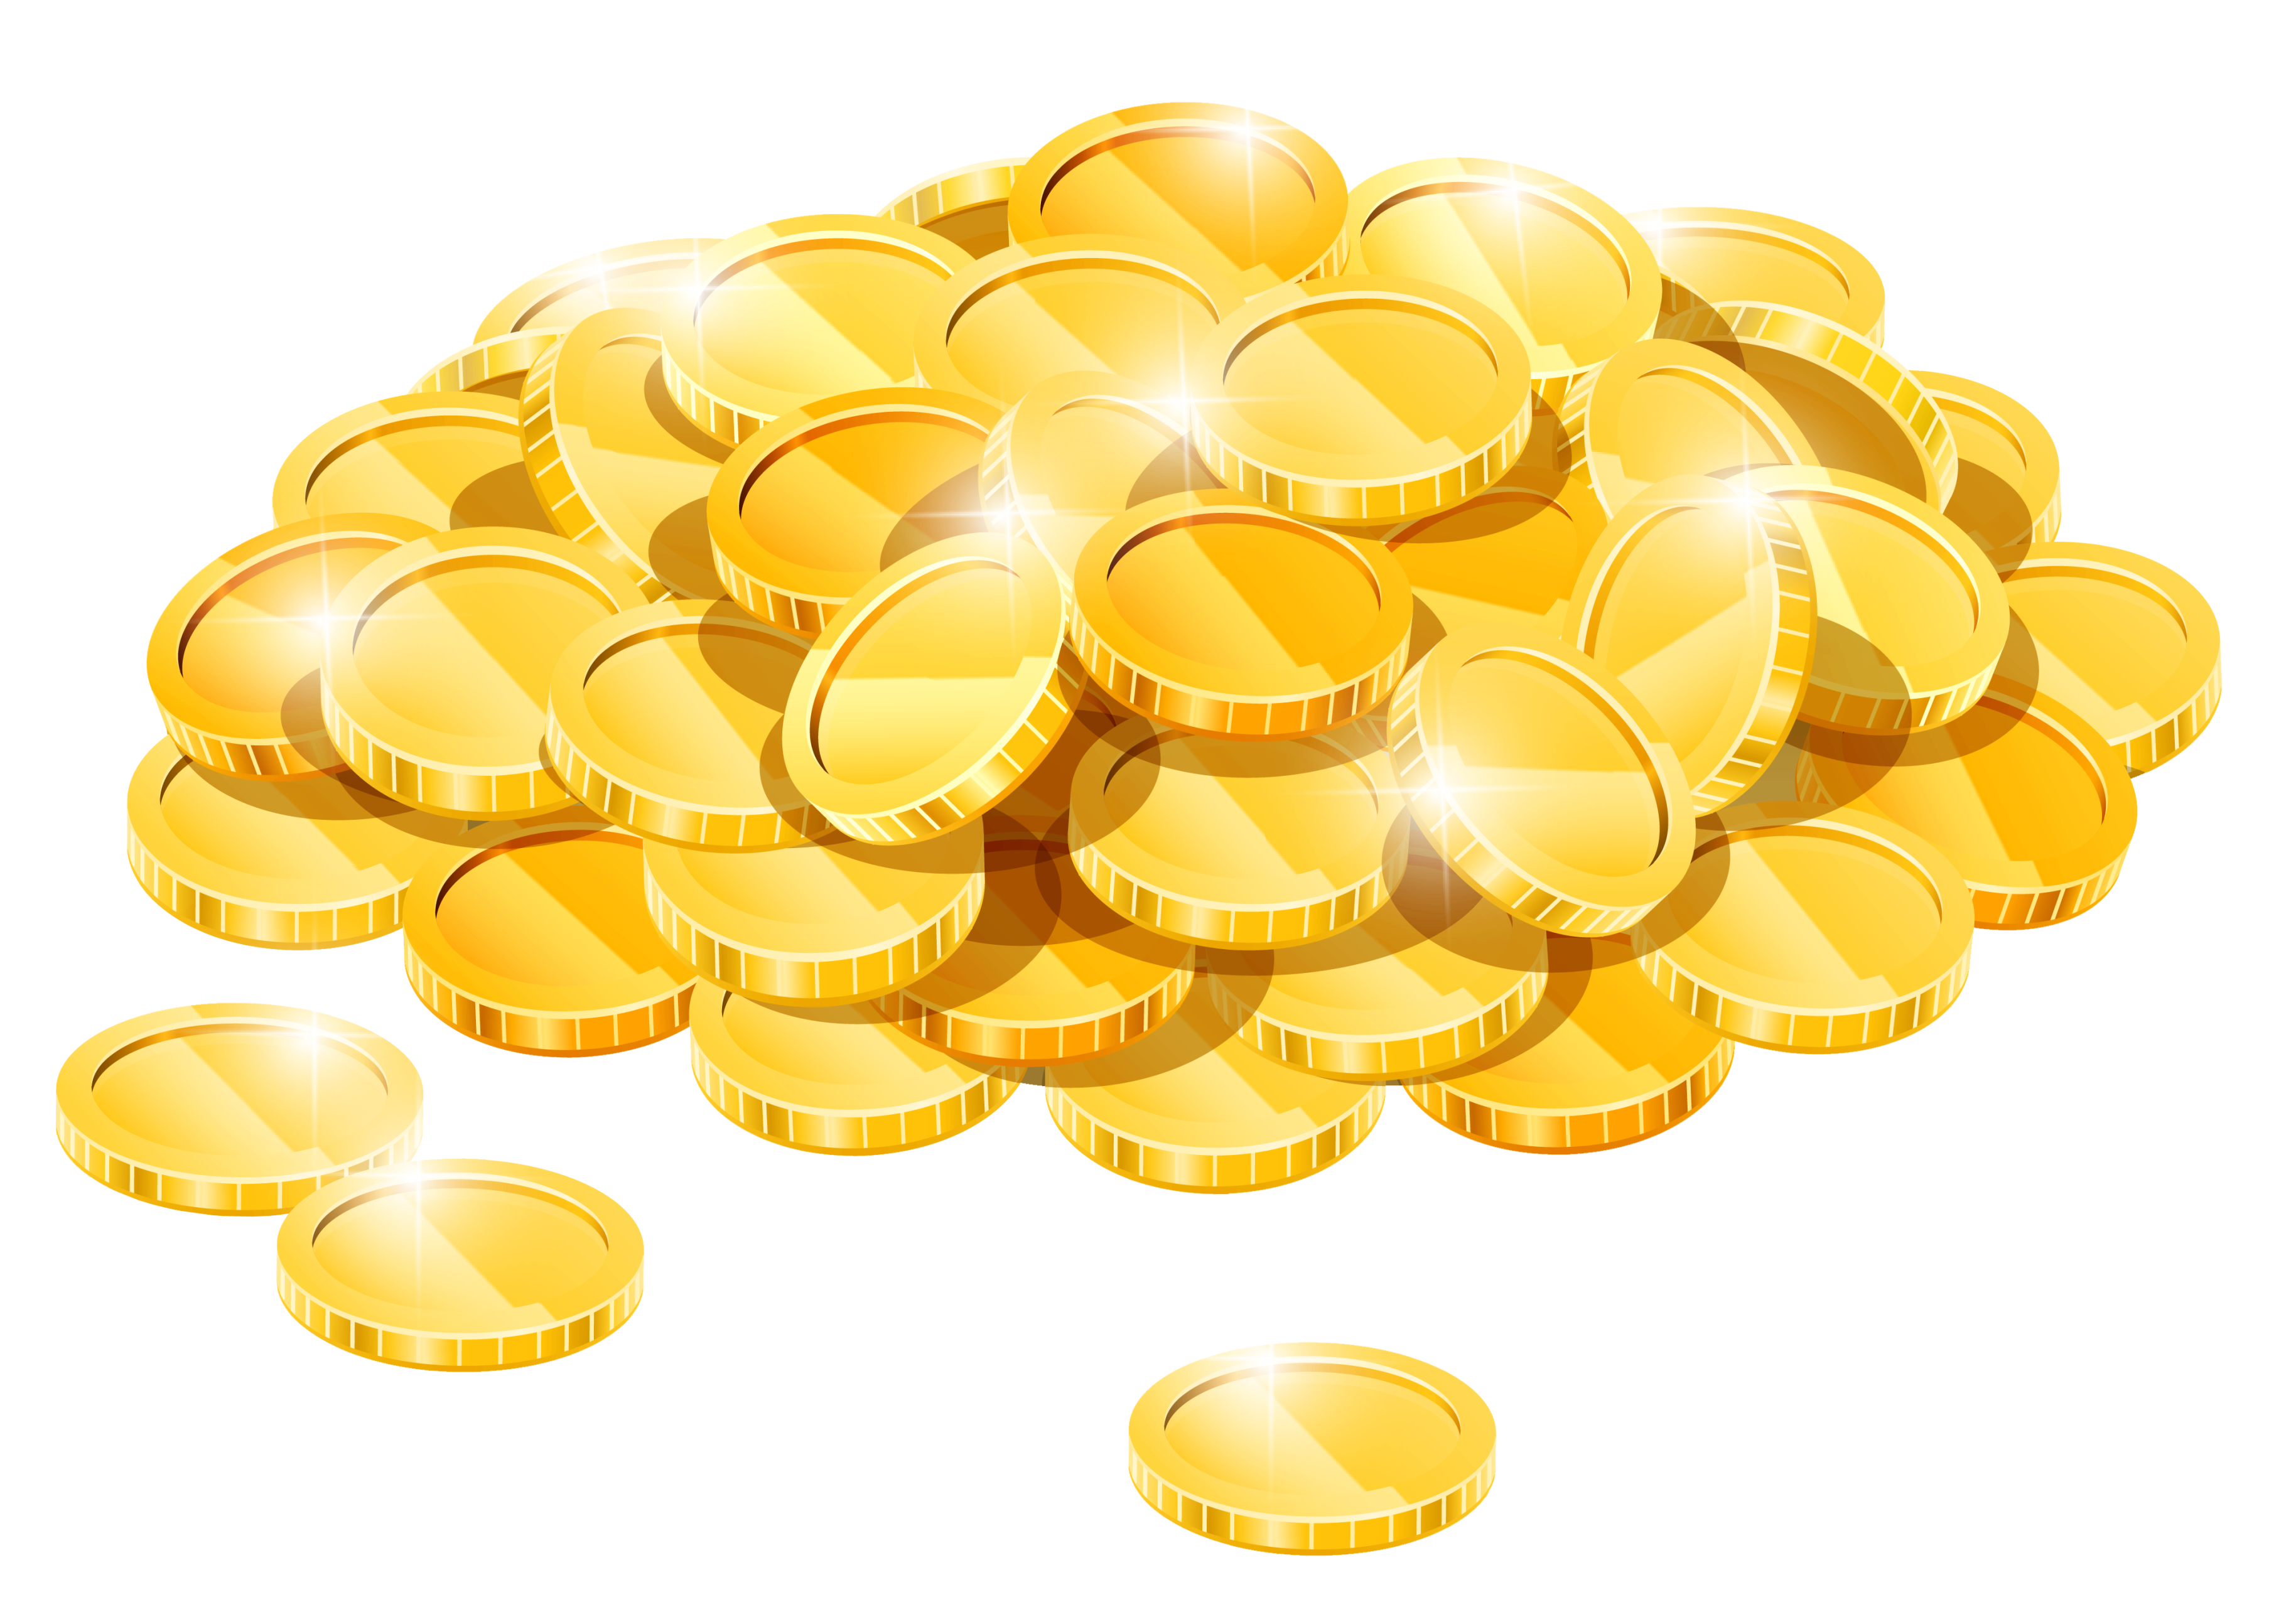 Glitter clipart pile gold. Coins png image purepng